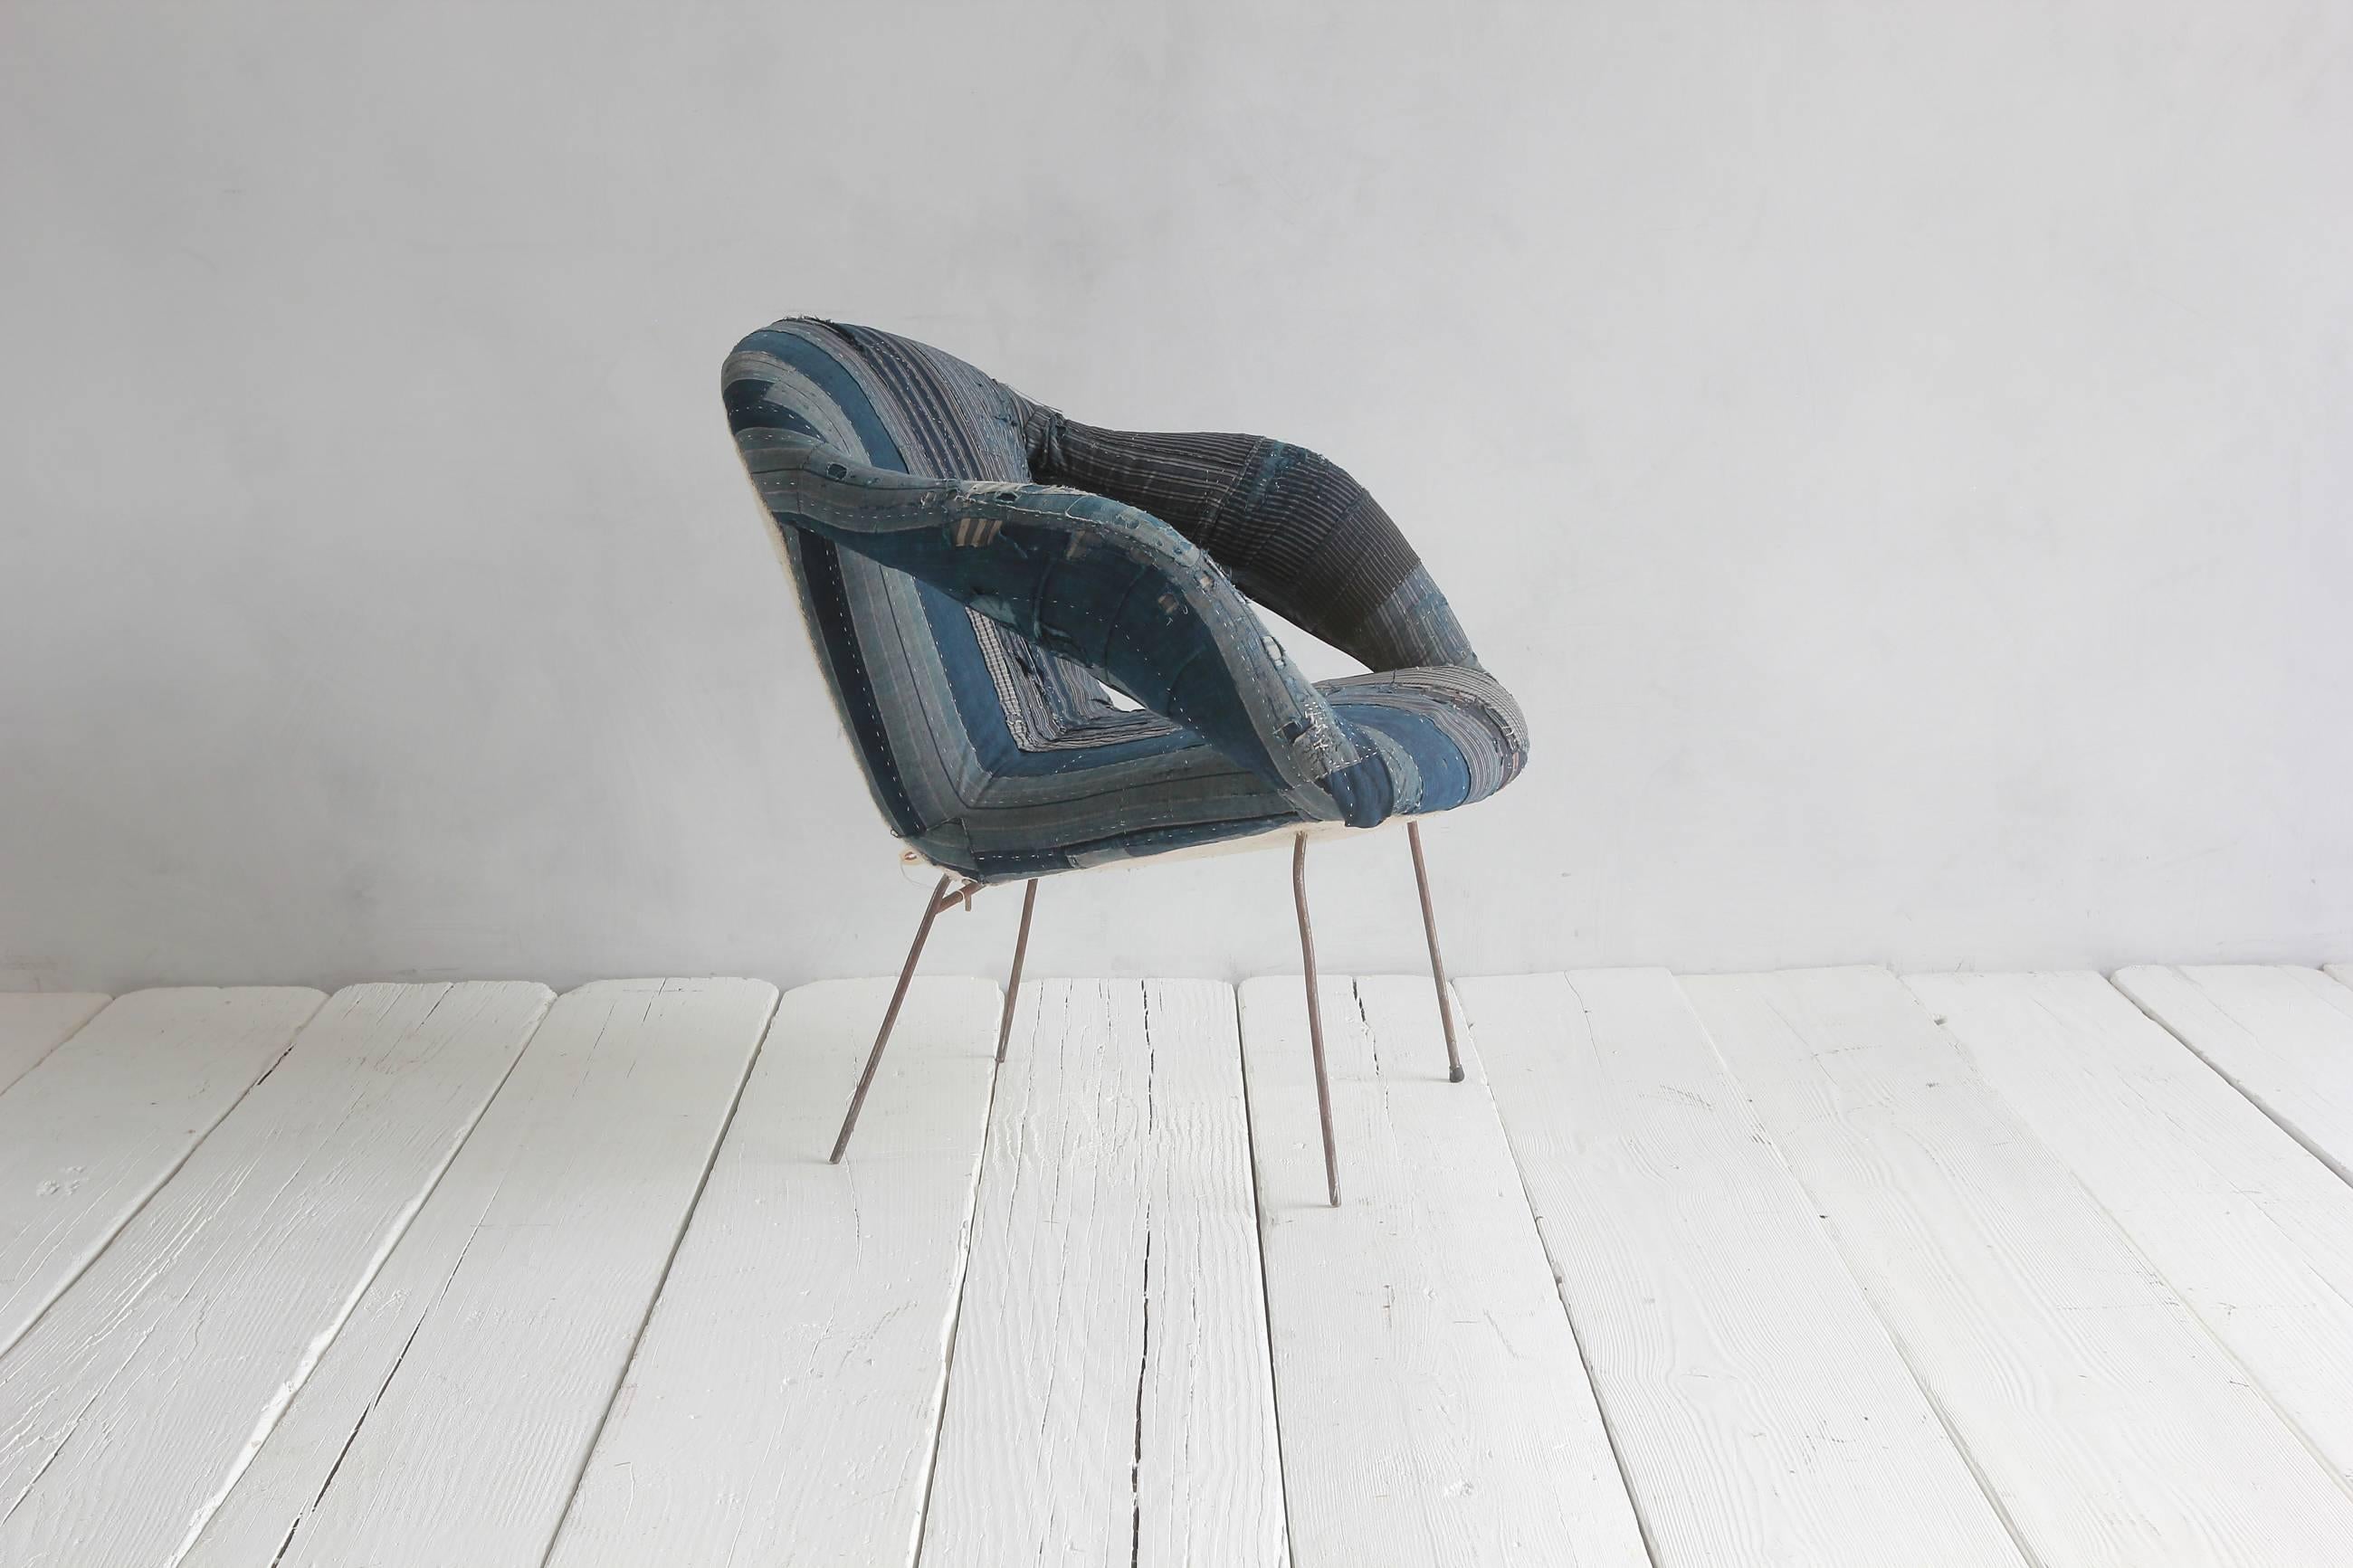 Mid-Century style armchair upholstered in Indigo African fabric with simple metal legs.